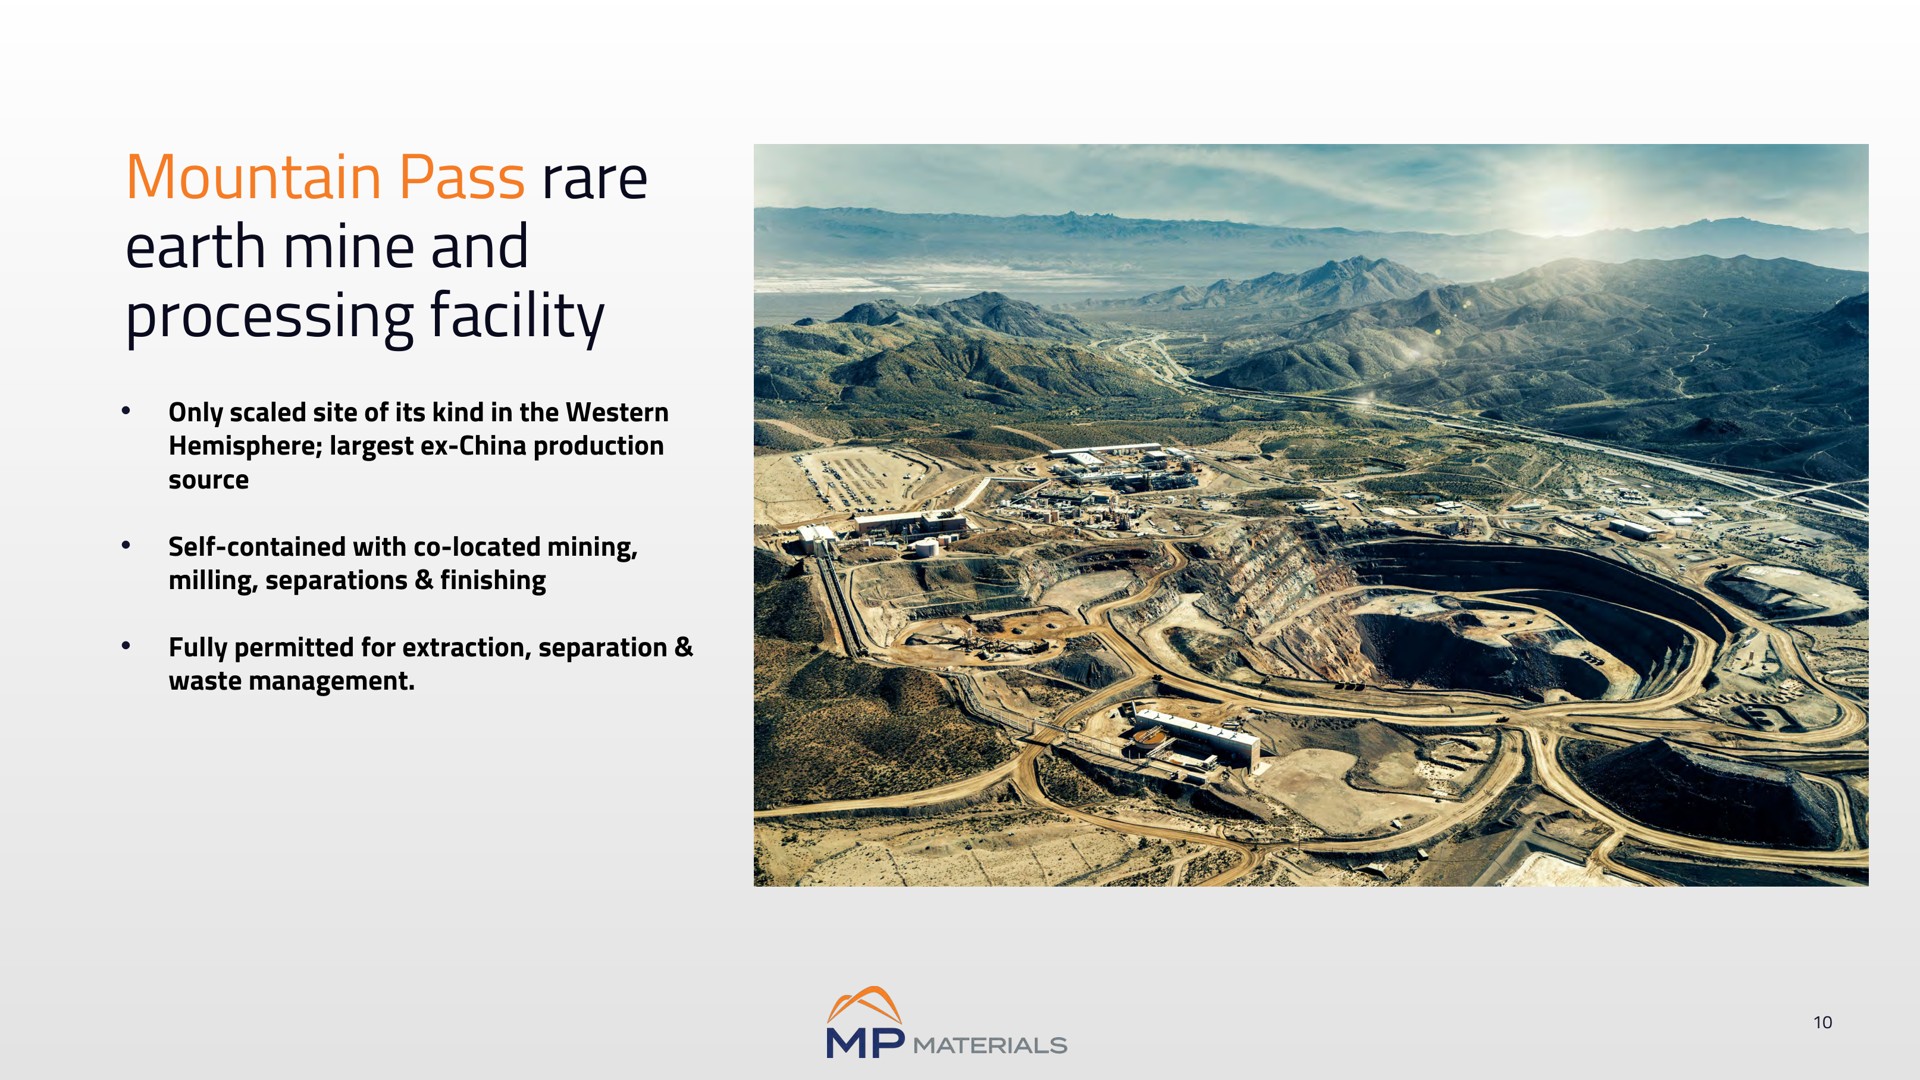 mountain pass rare earth mine and processing facility | MP Materials